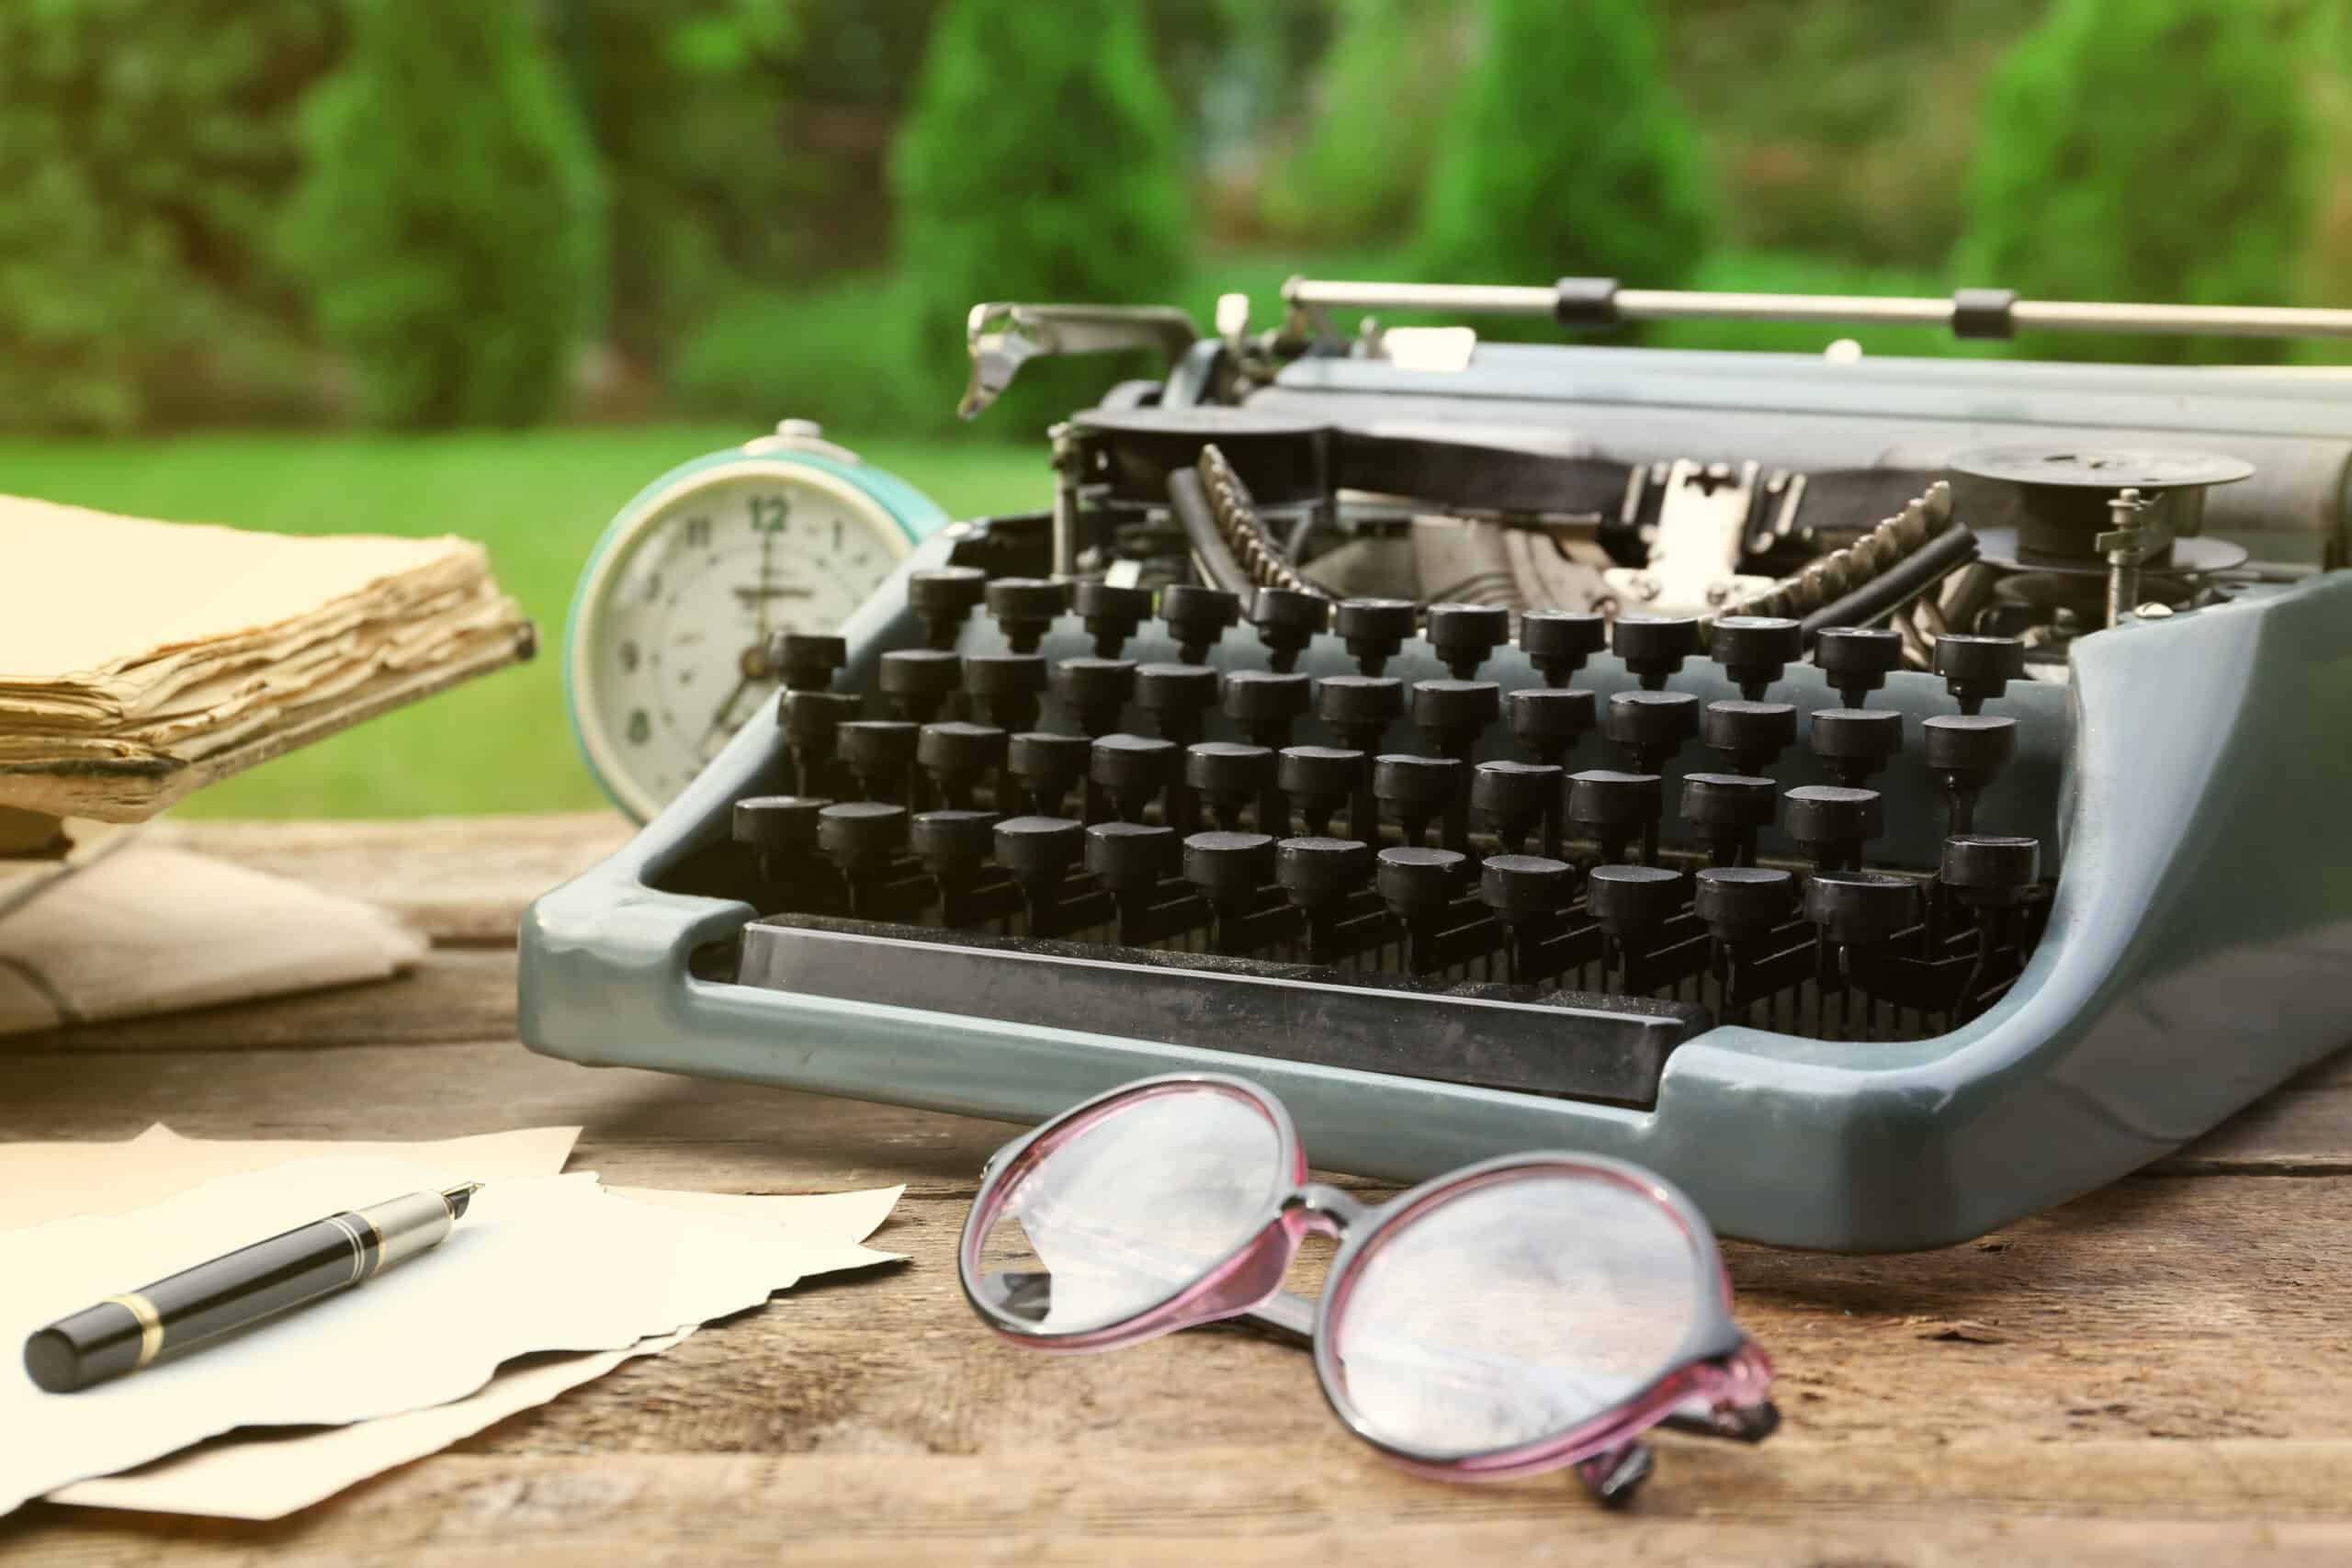 Vintage black typewriter with papers and pen on wooden table, outdoor